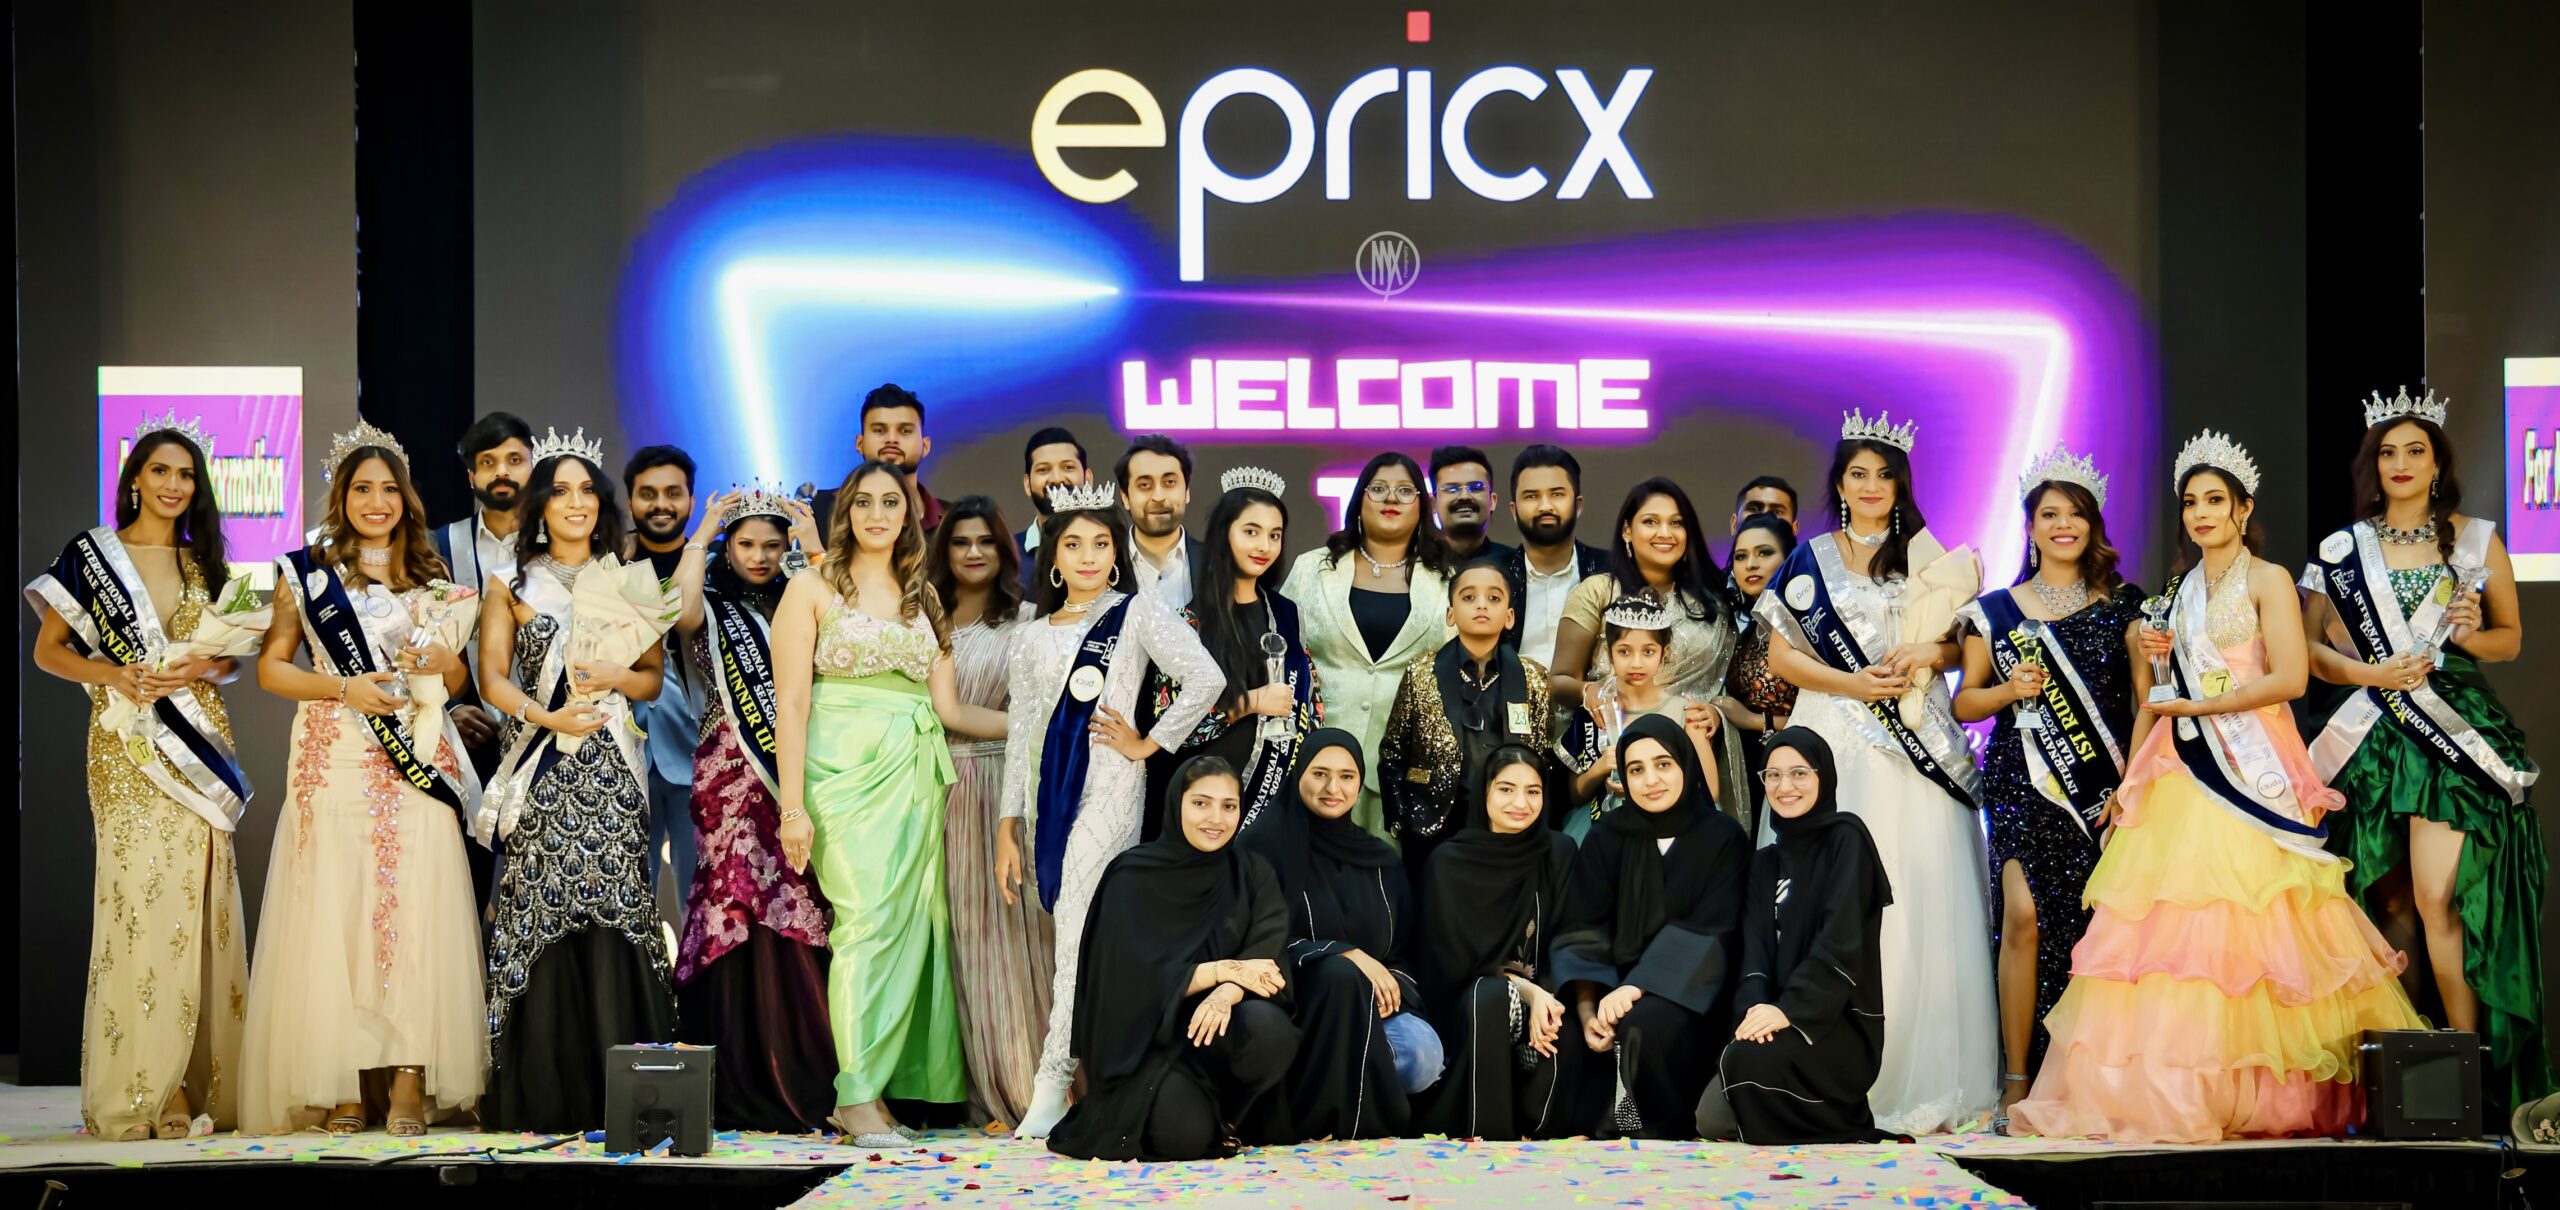 Epricx Presents International Fashion Idol of UAE, Edition 2: A Spectacular Showcase of Talent and Glamour